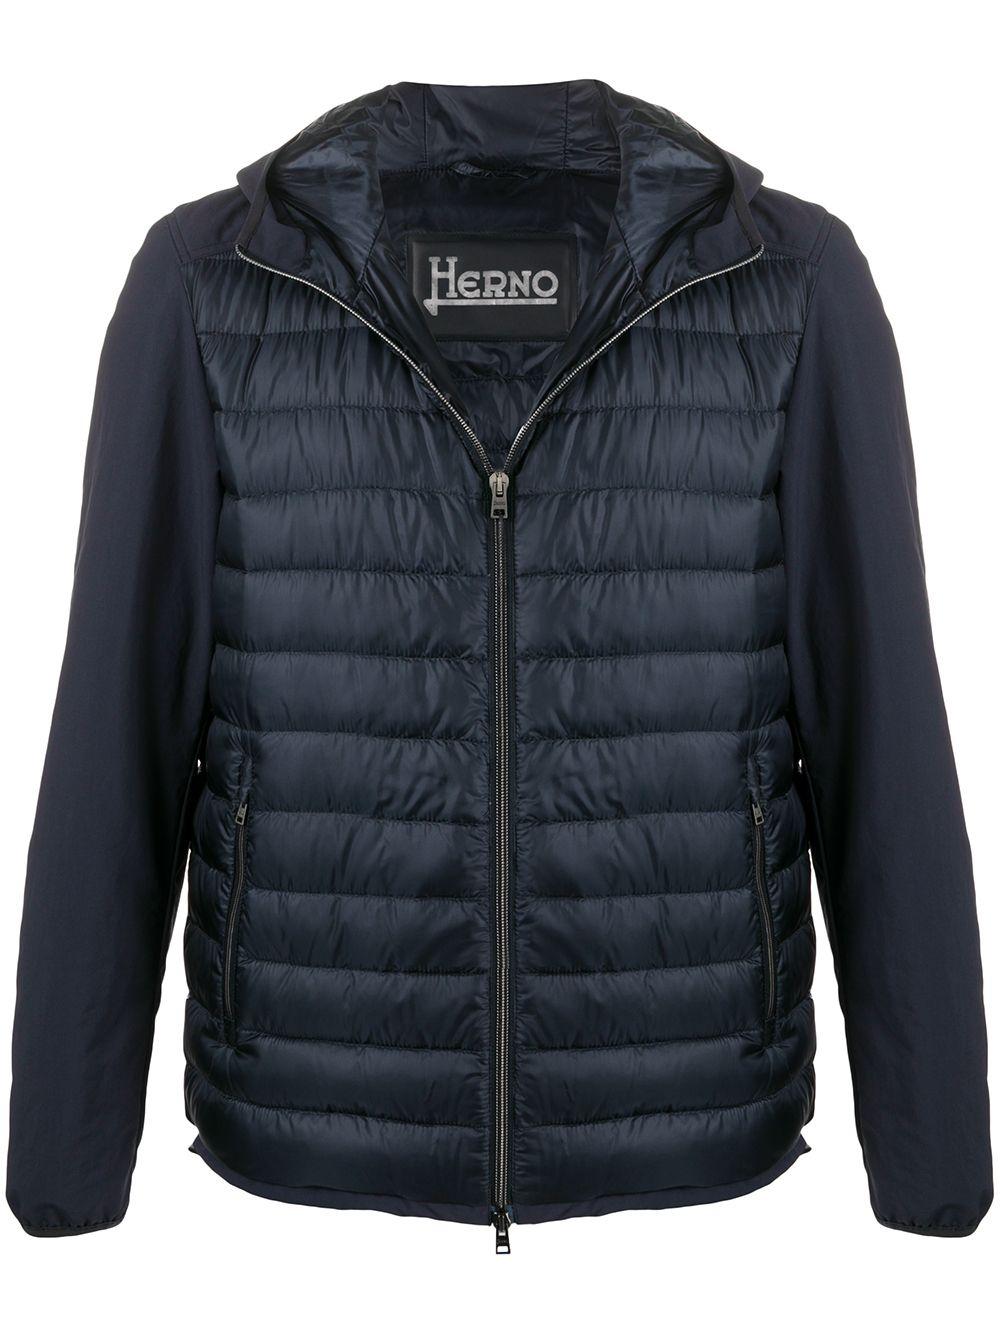 Herno Synthetic Quilted-body Hooded Jacket in Blue for Men - Lyst